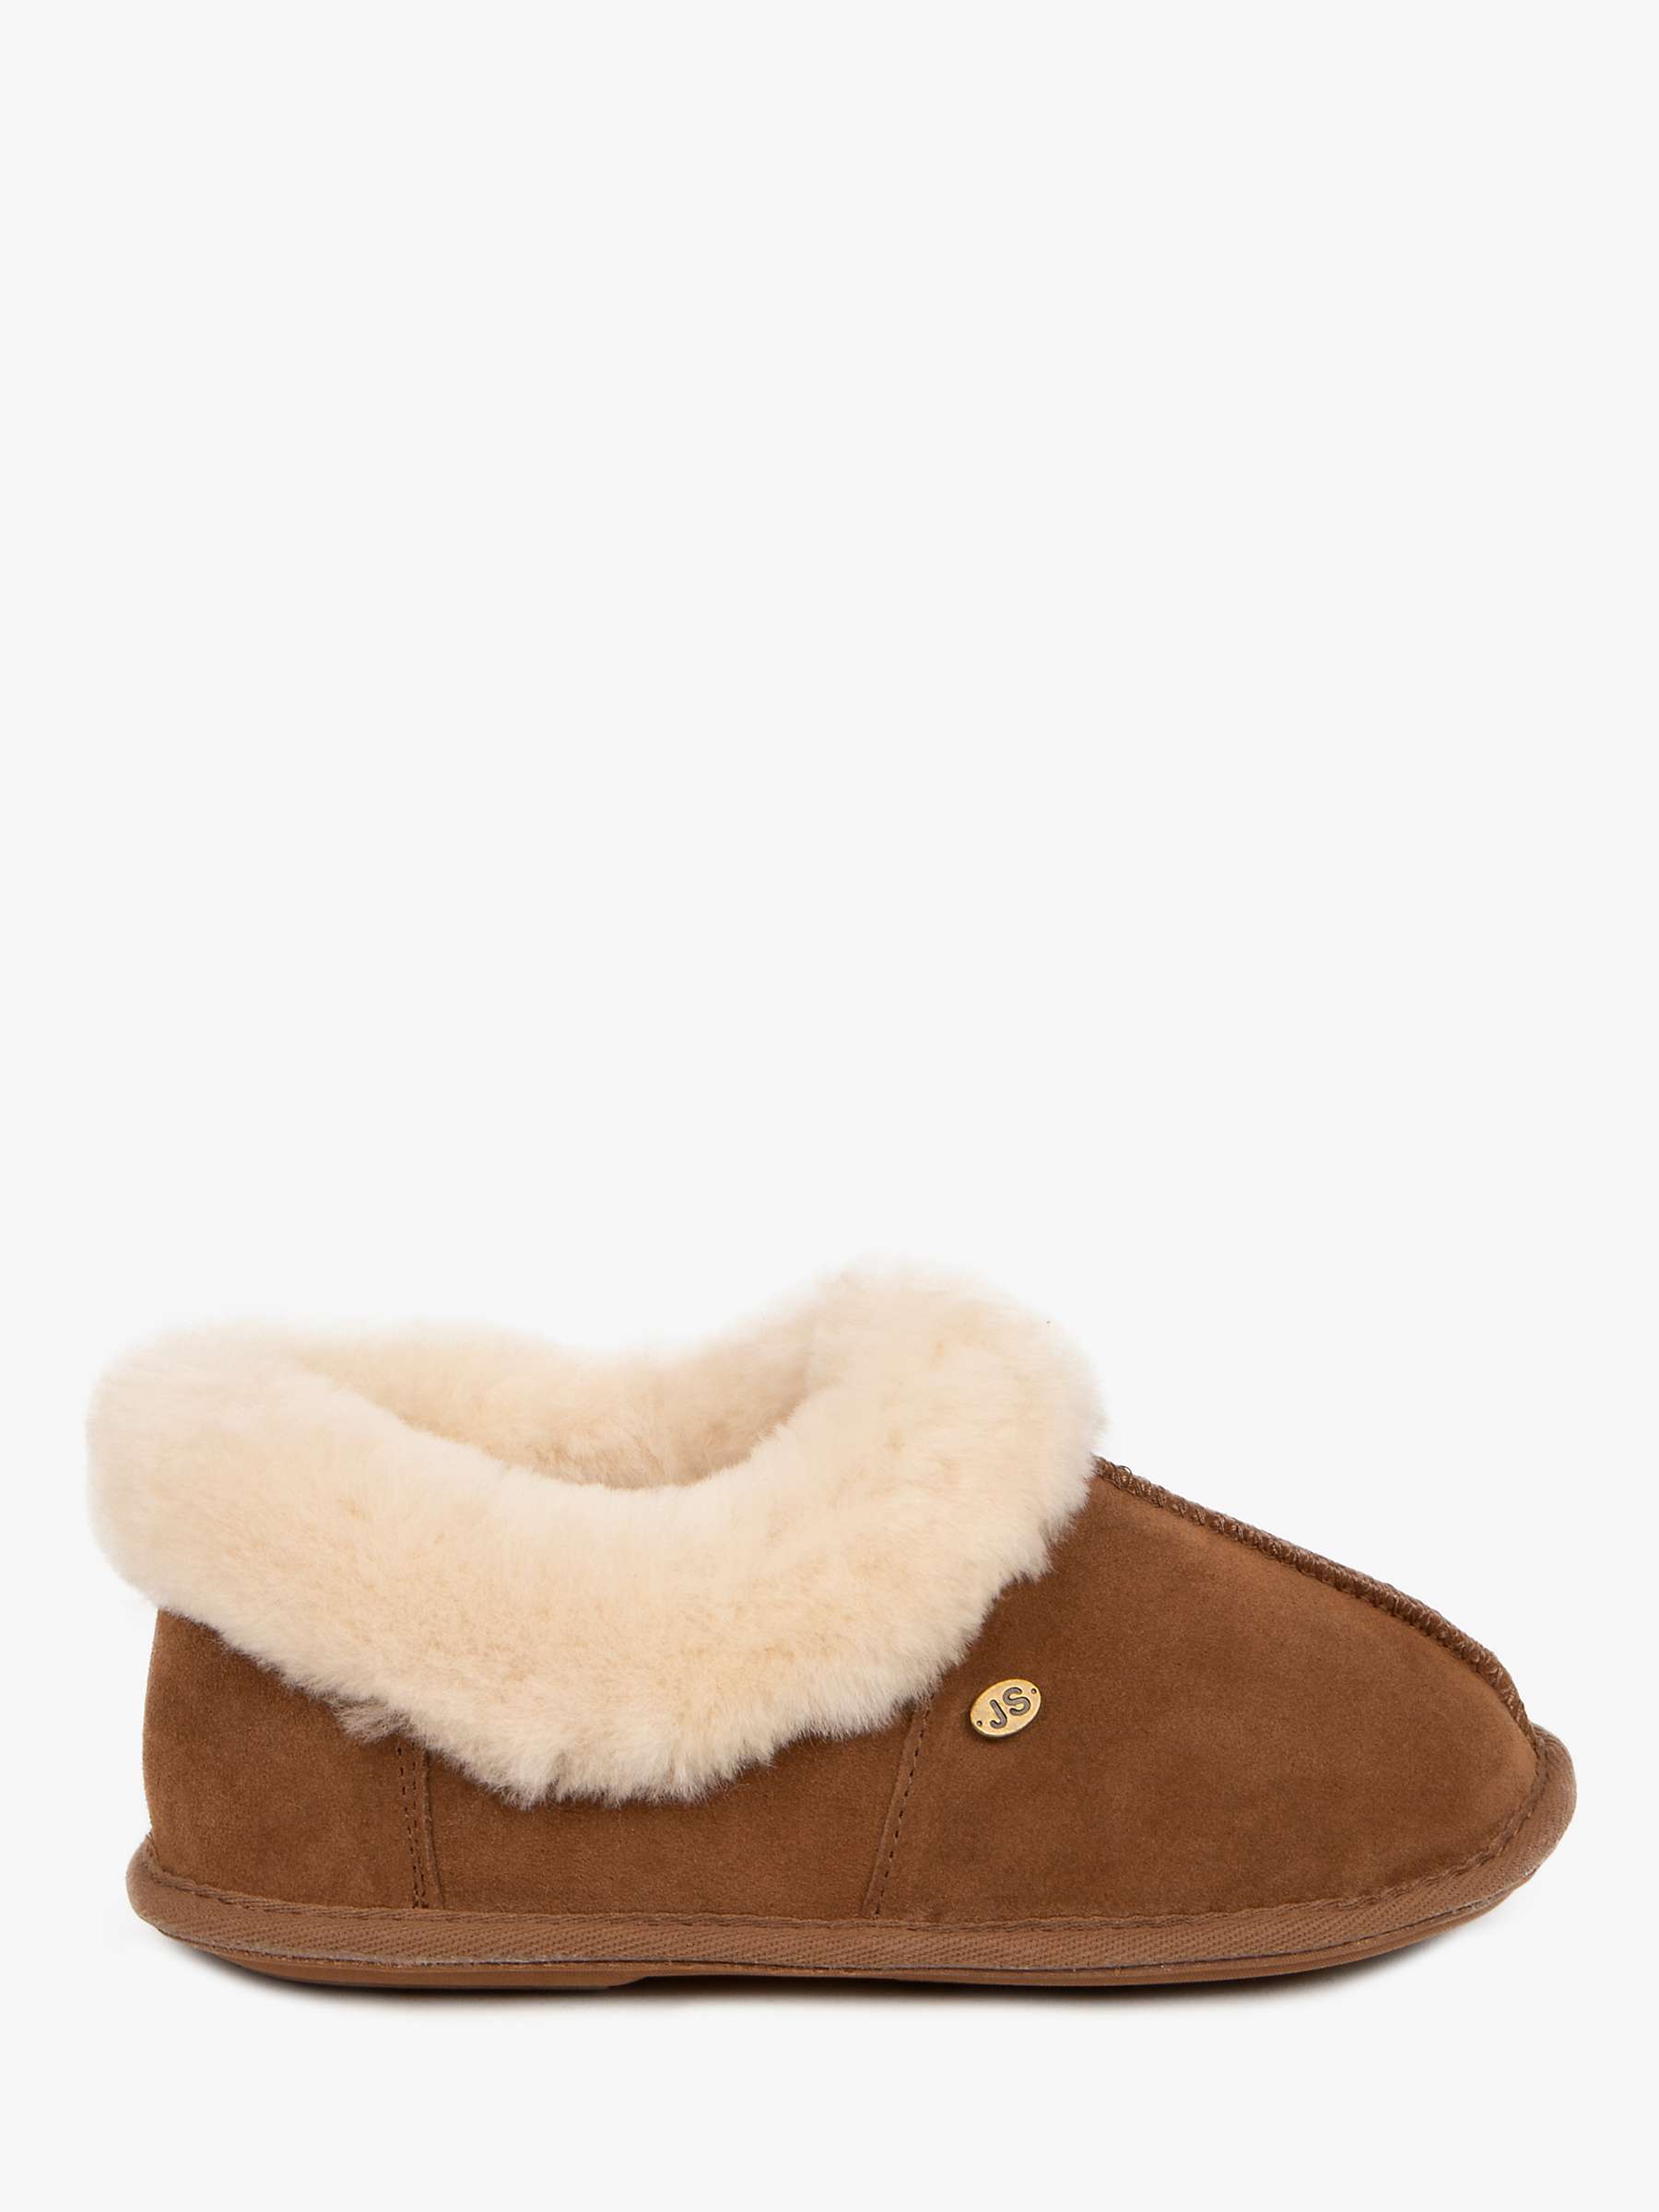 Just Sheepskin Classic Suede Slippers, Chestnut at John Lewis & Partners